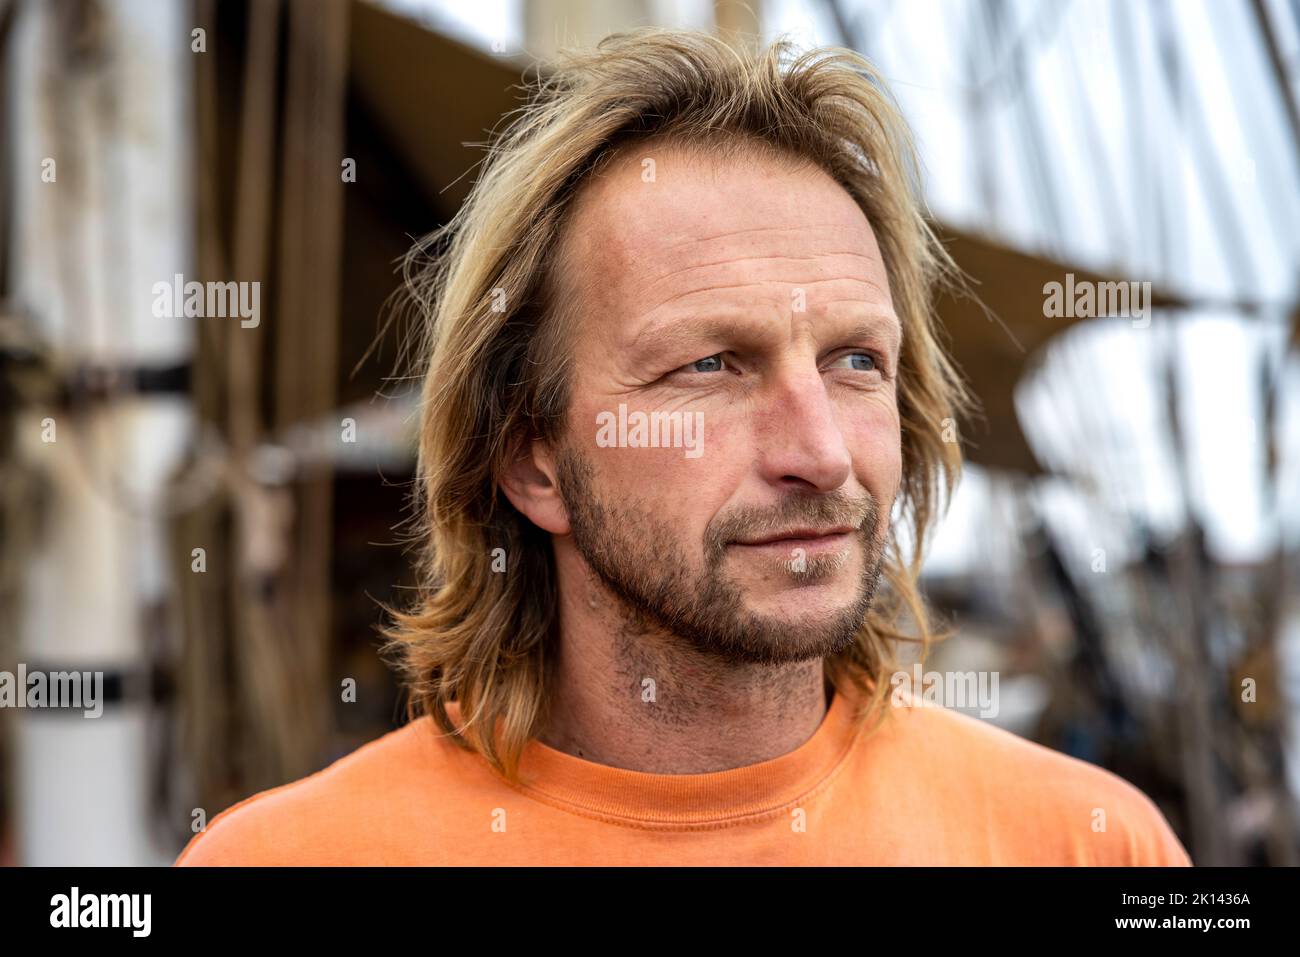 Captain Andreas Lackner, founder of the shipping company 'Fairtransport', here on board the 'Tres Hombres' in its home port in Den Helder Netherlands. Here it is being prepared by the crew for its next voyage. The schooner 'Tres Hombres' transports goods such as wine, coffee, chocolate and rum from the Caribbean across the Atlantic to Europe in a completely climate-neutral manner. Stock Photo